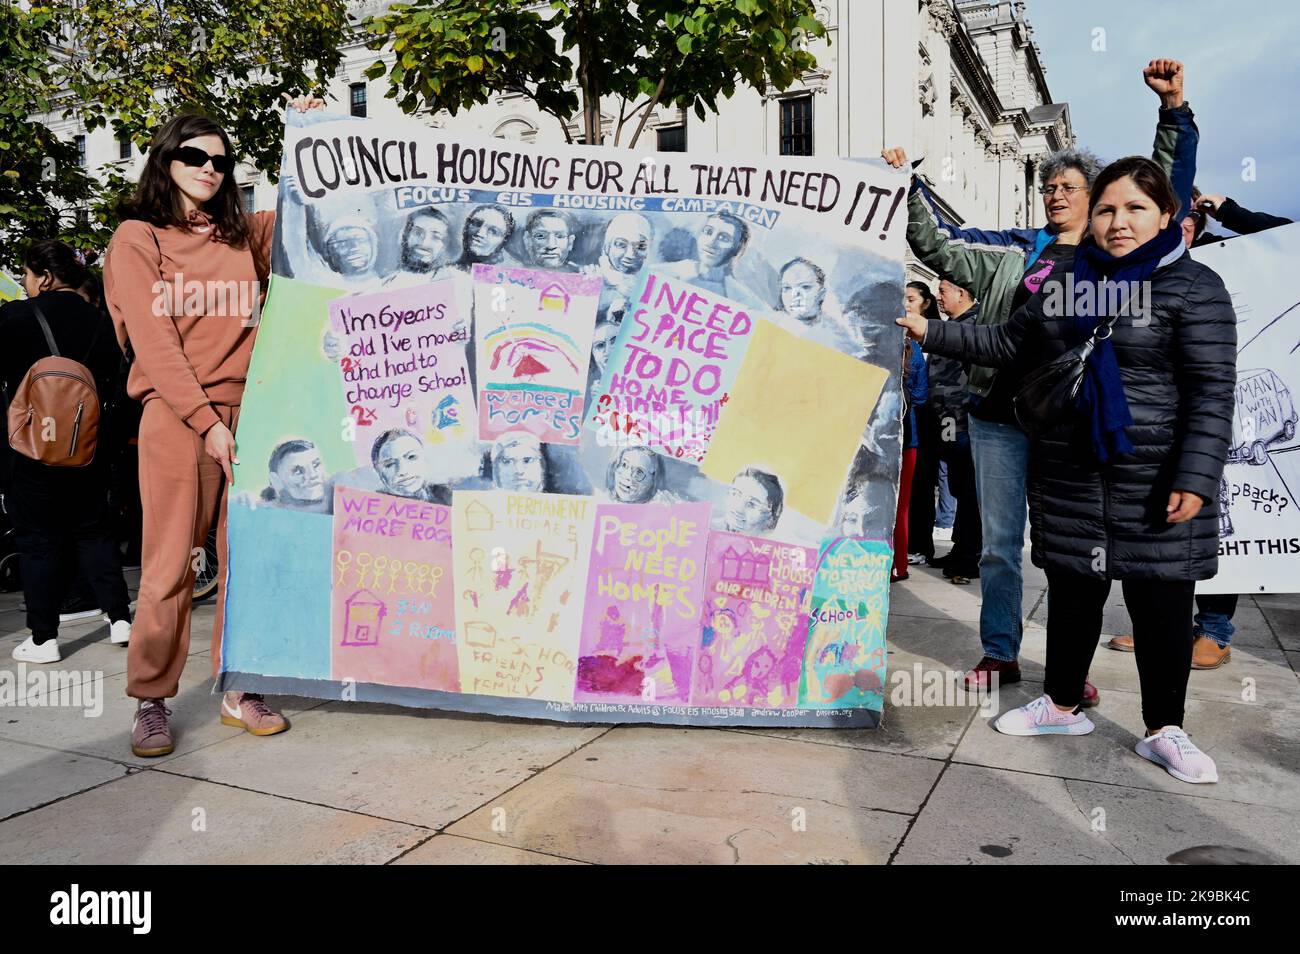 Demonstrators marched from Parliament Square to Downing Street to demand an end to overcrowded social housing. They are appealing for high-quality, safe, secure 3,4,5 bed accommodation now. Stock Photo